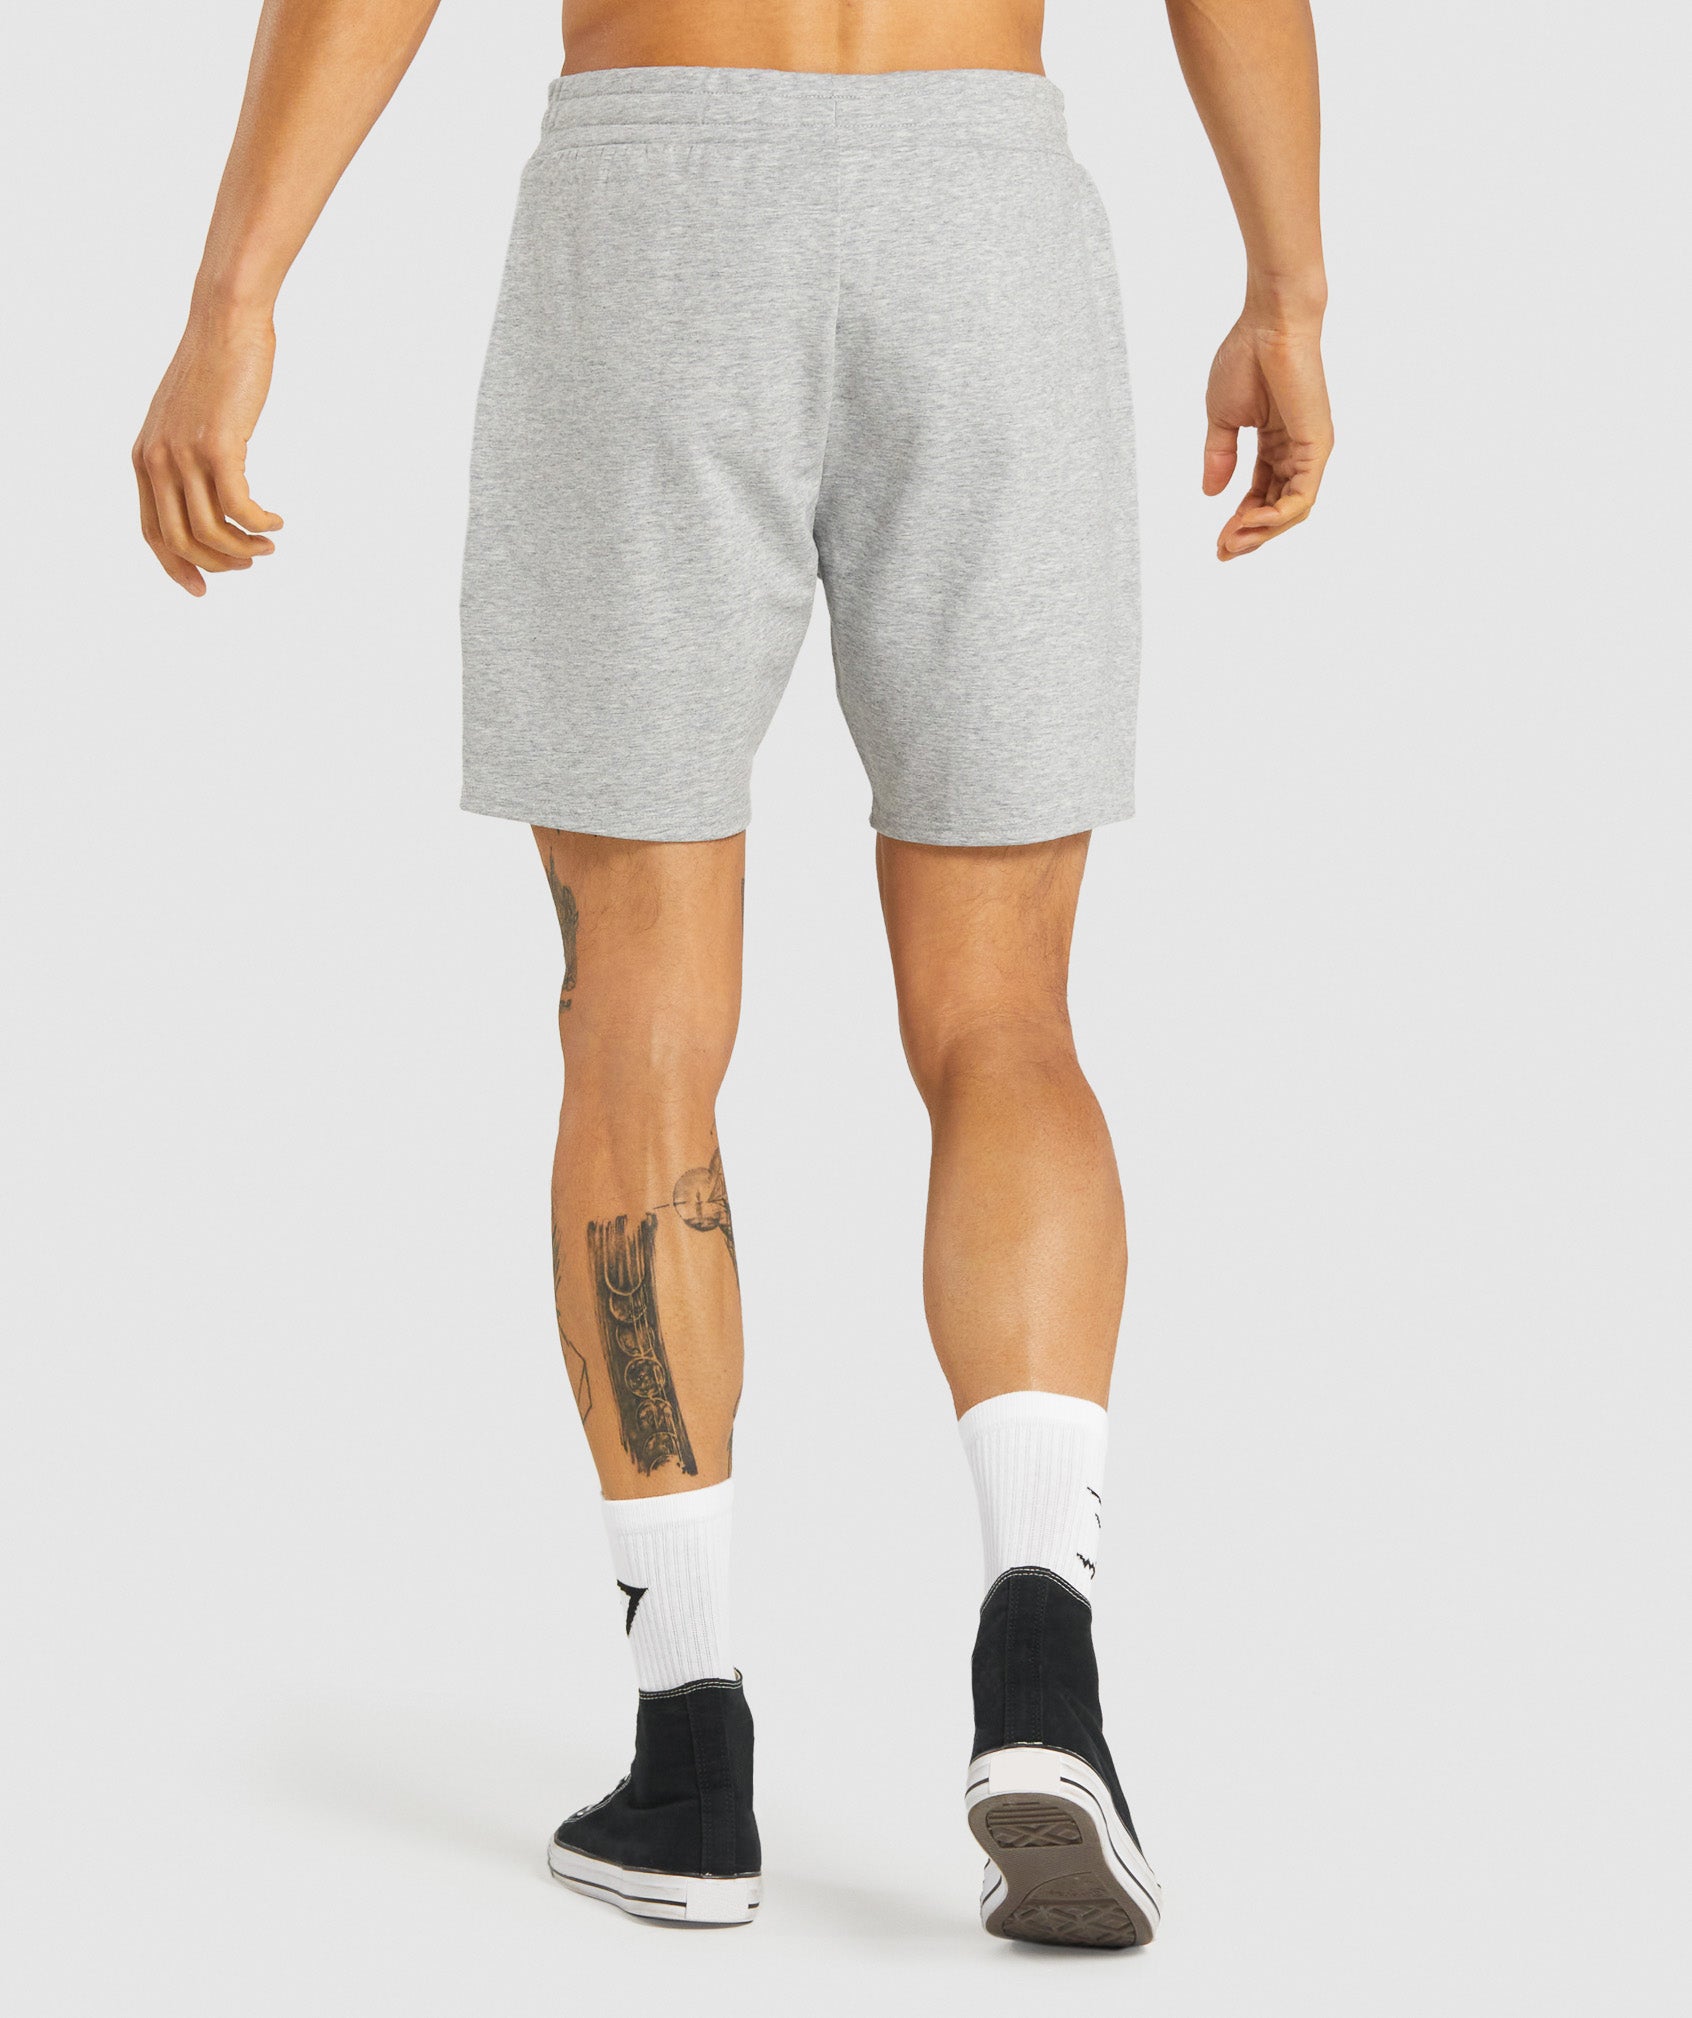 Essential 7” Shorts in Light Grey Marl - view 2